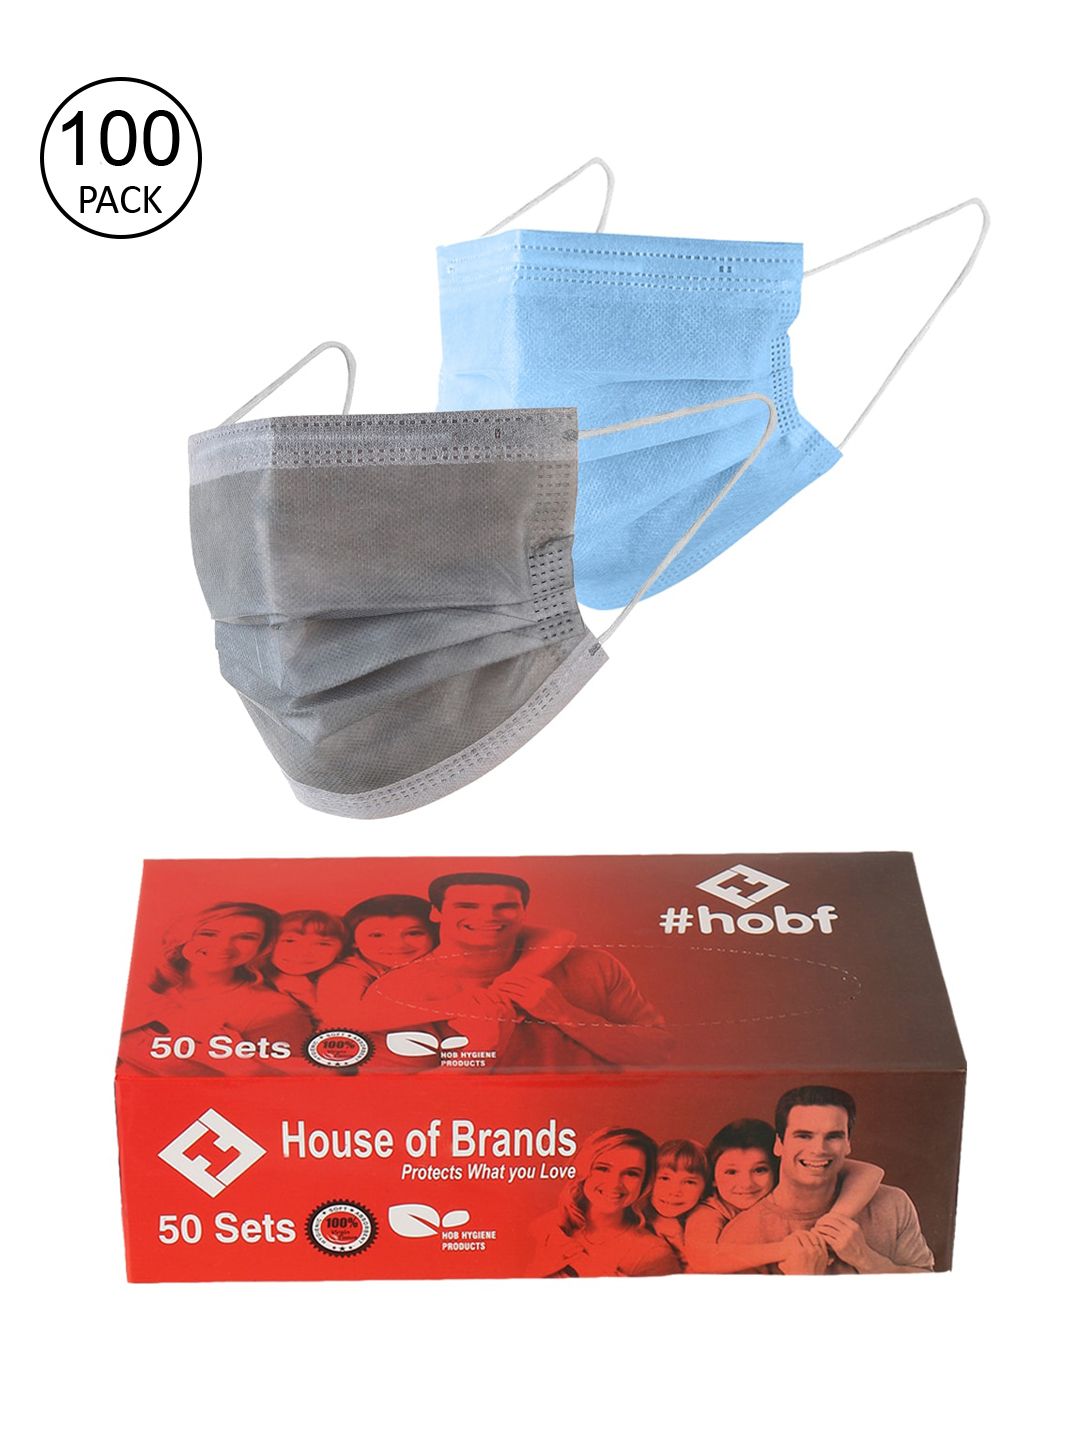 LONDON FASHION hob Unisex 100 Pcs Disposable 3-Ply Surgical Masks Price in India